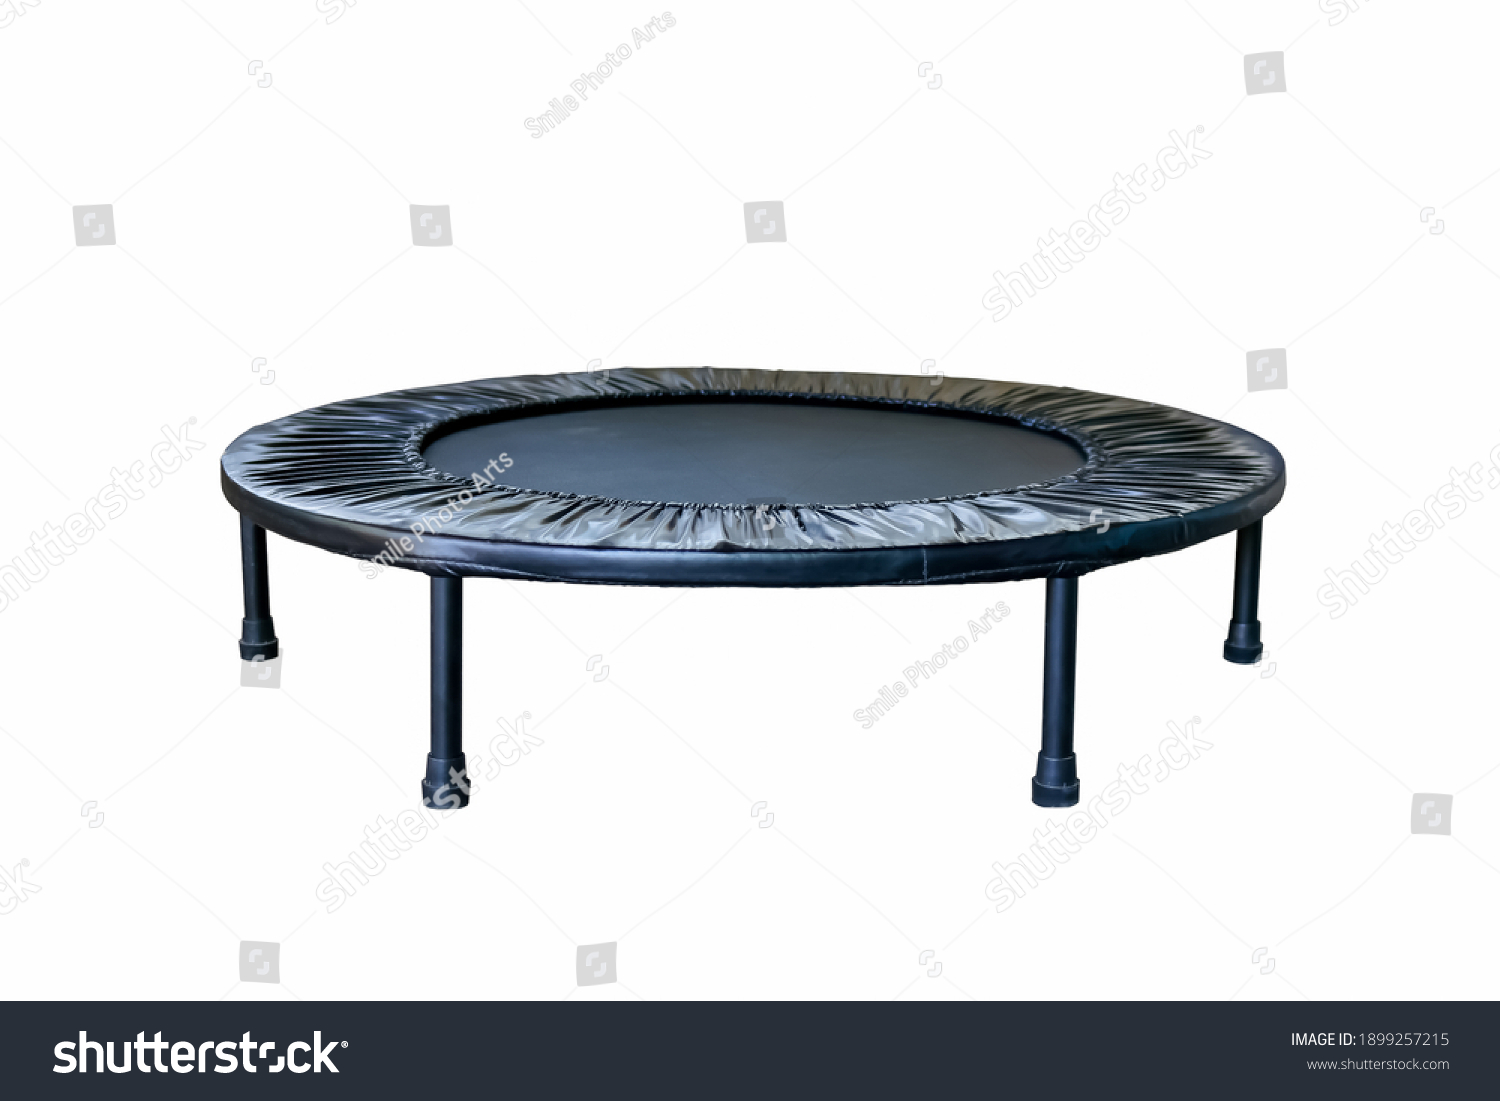 Black Trampoline on white background, for children and adults for fun indoor or outdoor jumping, Trampoline for fitness exercises #1899257215